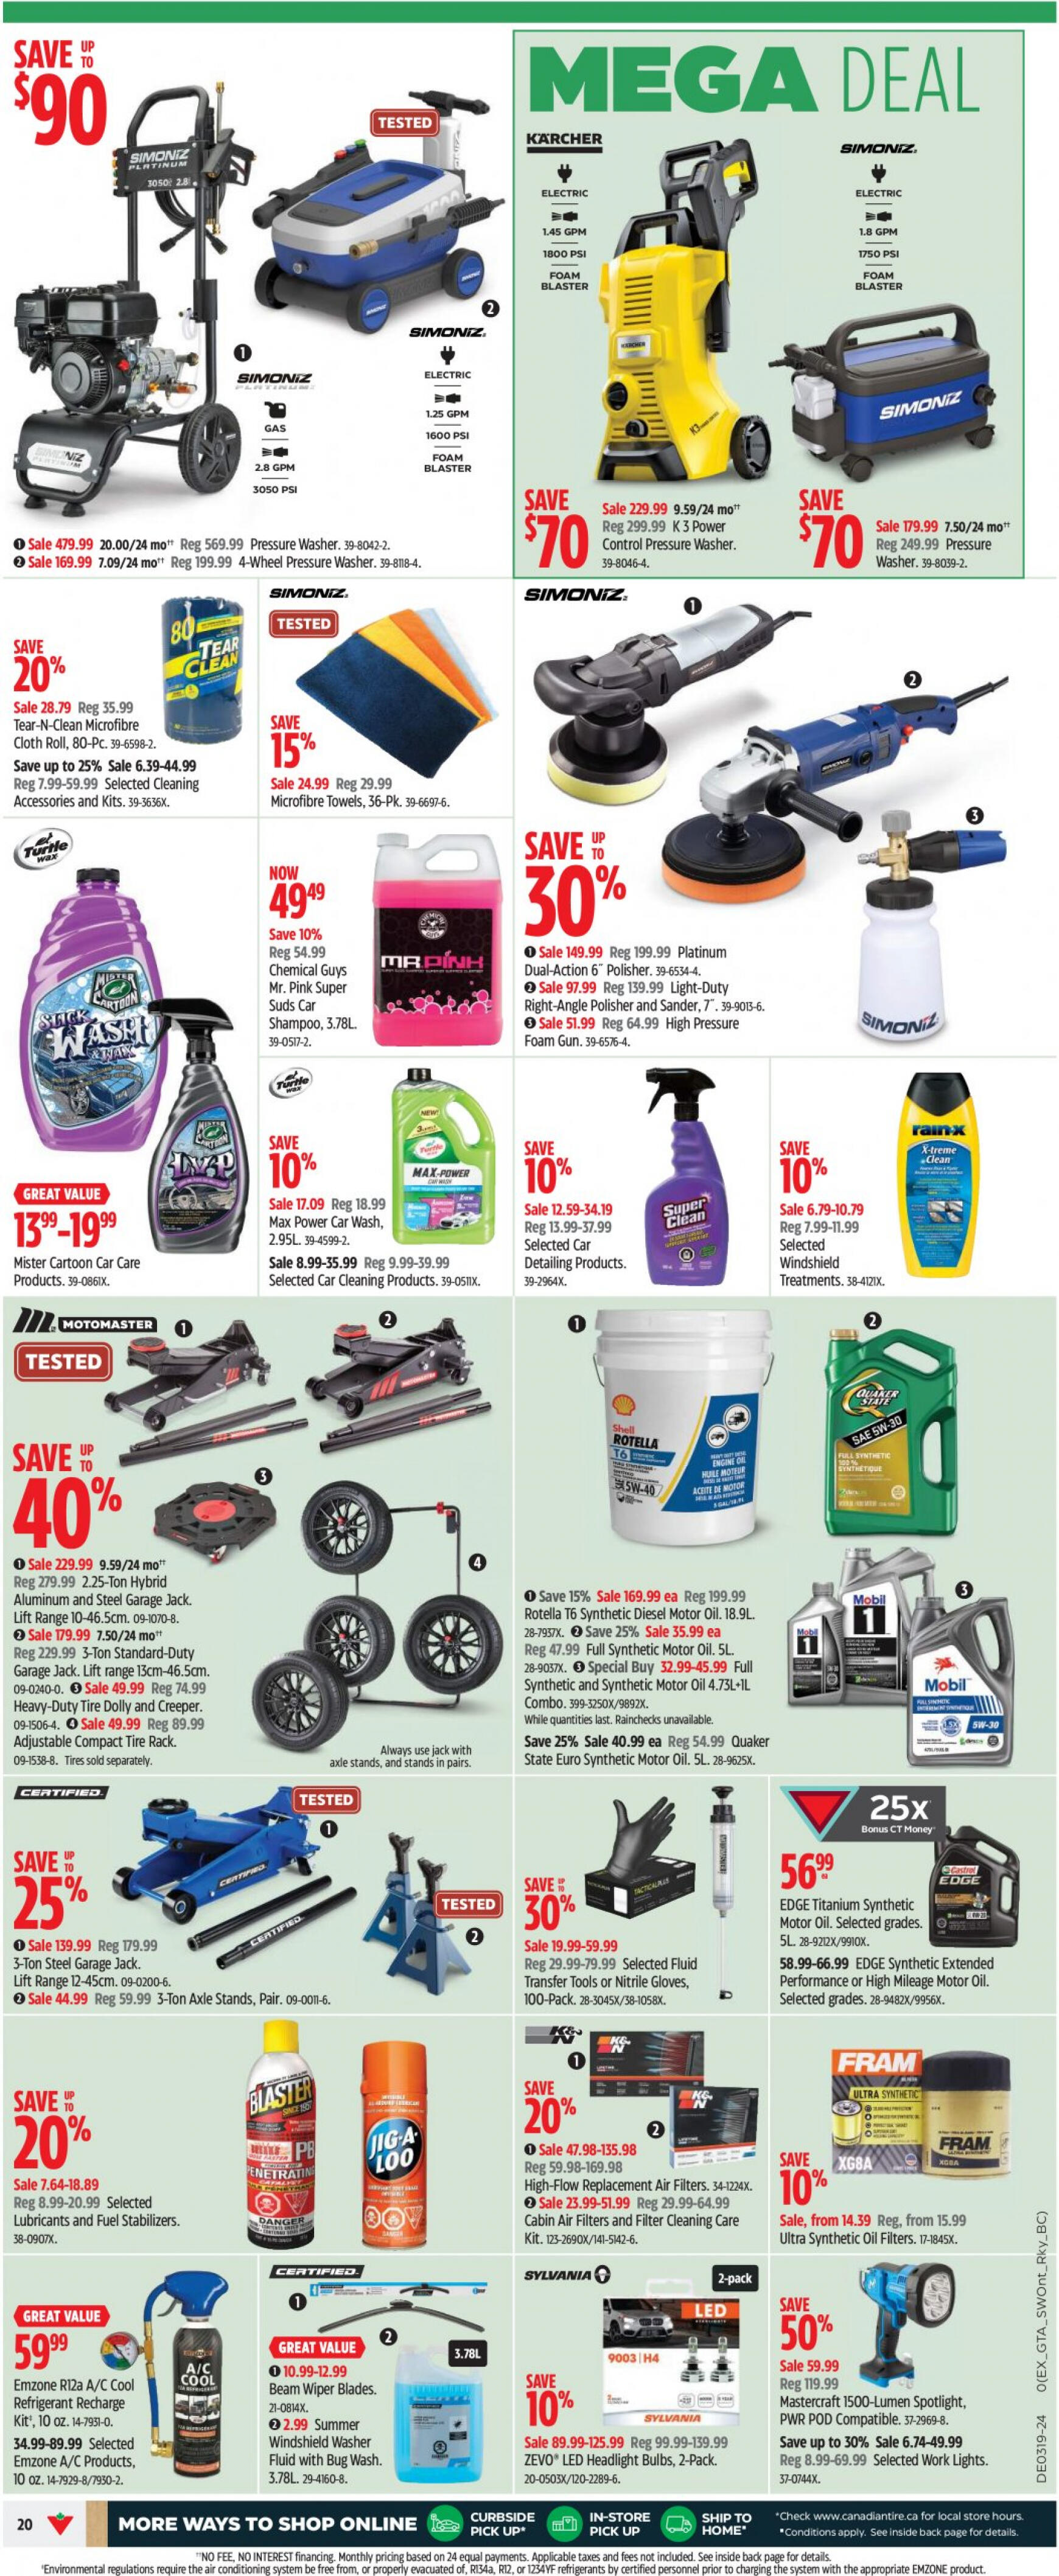 canadian-tire - Canadian Tire flyer current 02.05. - 08.05. - page: 19